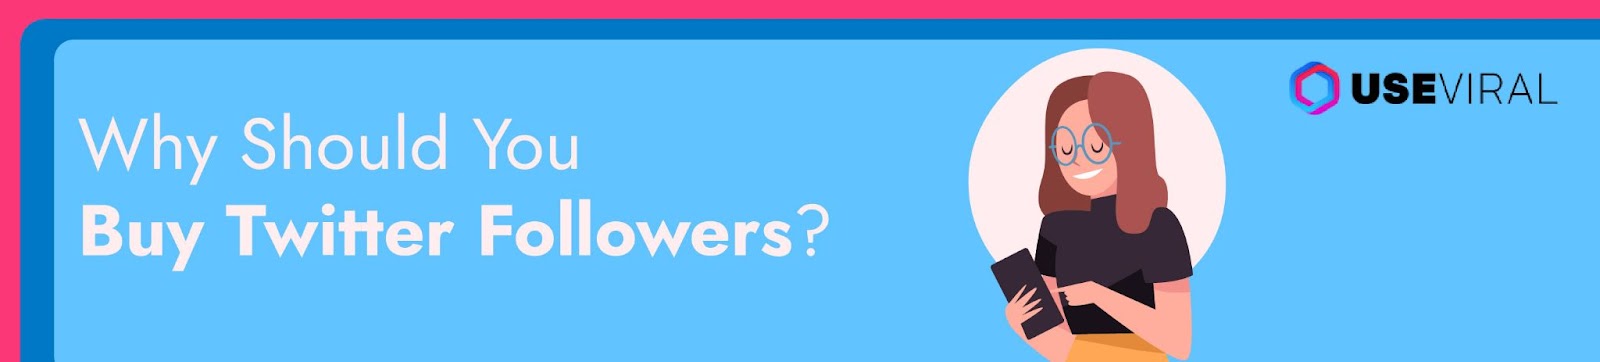 Why Should You Buy Twitter Followers?